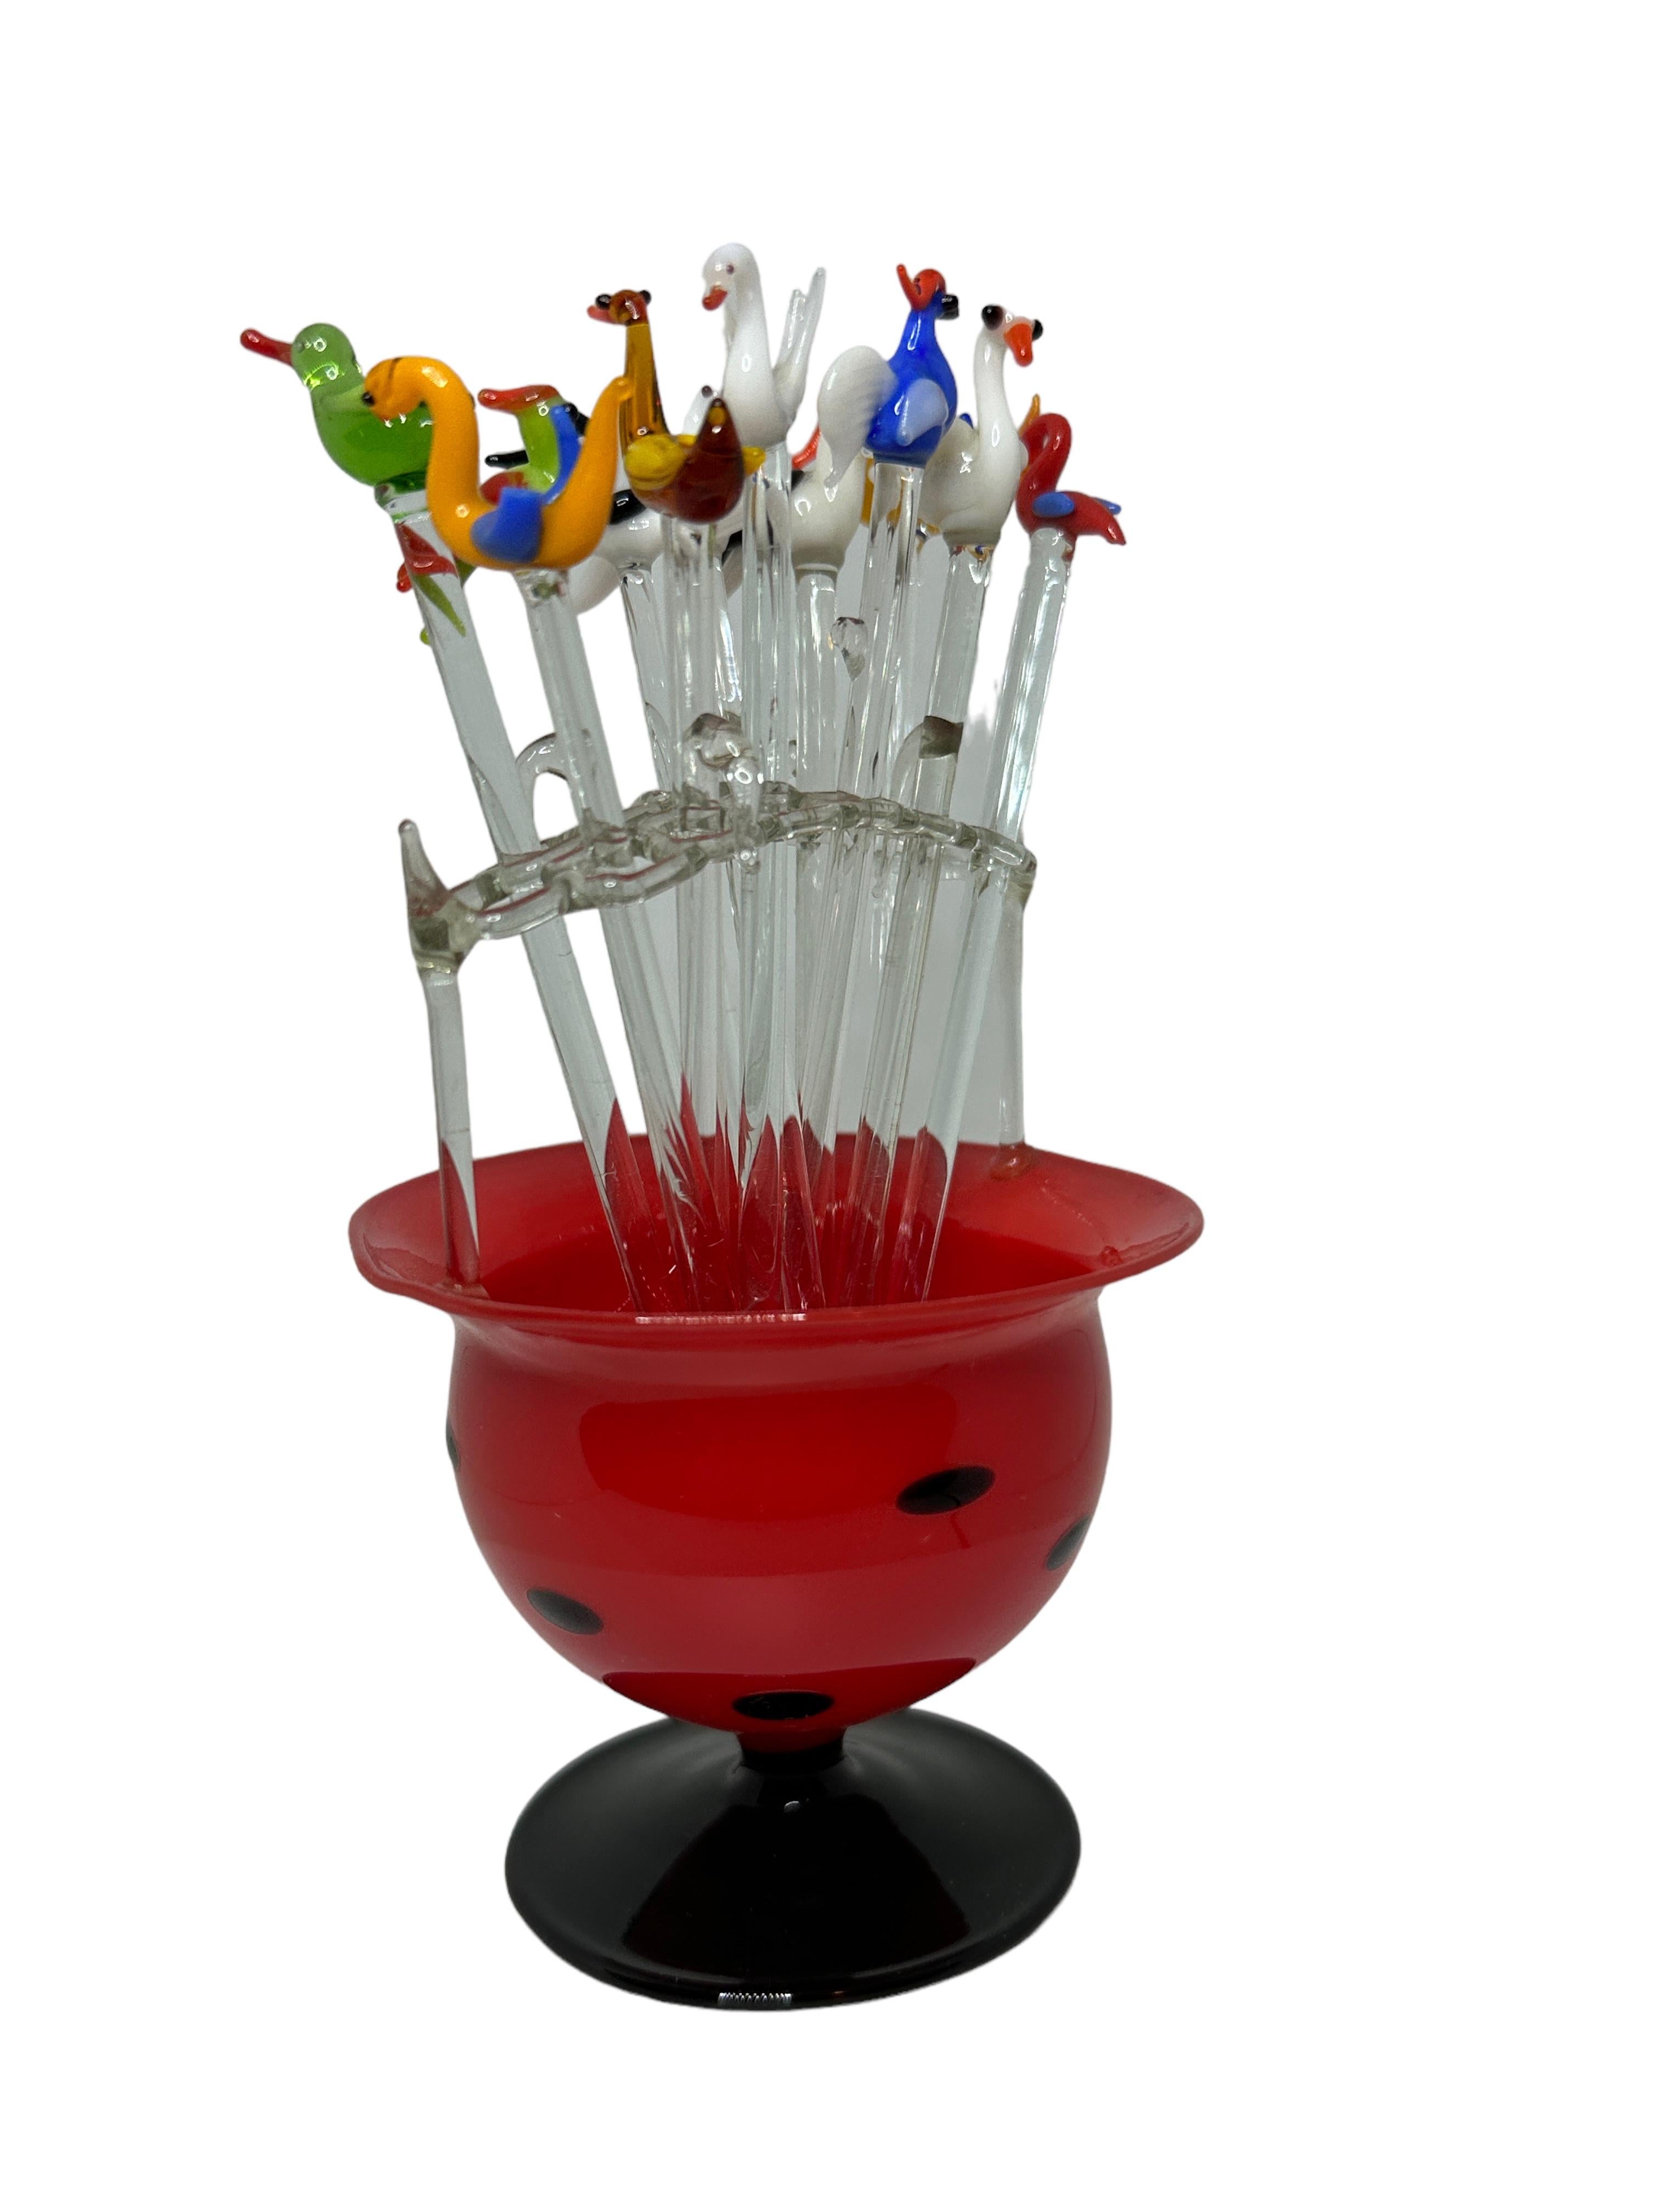 Austrian Bimini Glass Cocktail Picks with Red Bowl Stand, 1920s, Vienna Austria For Sale